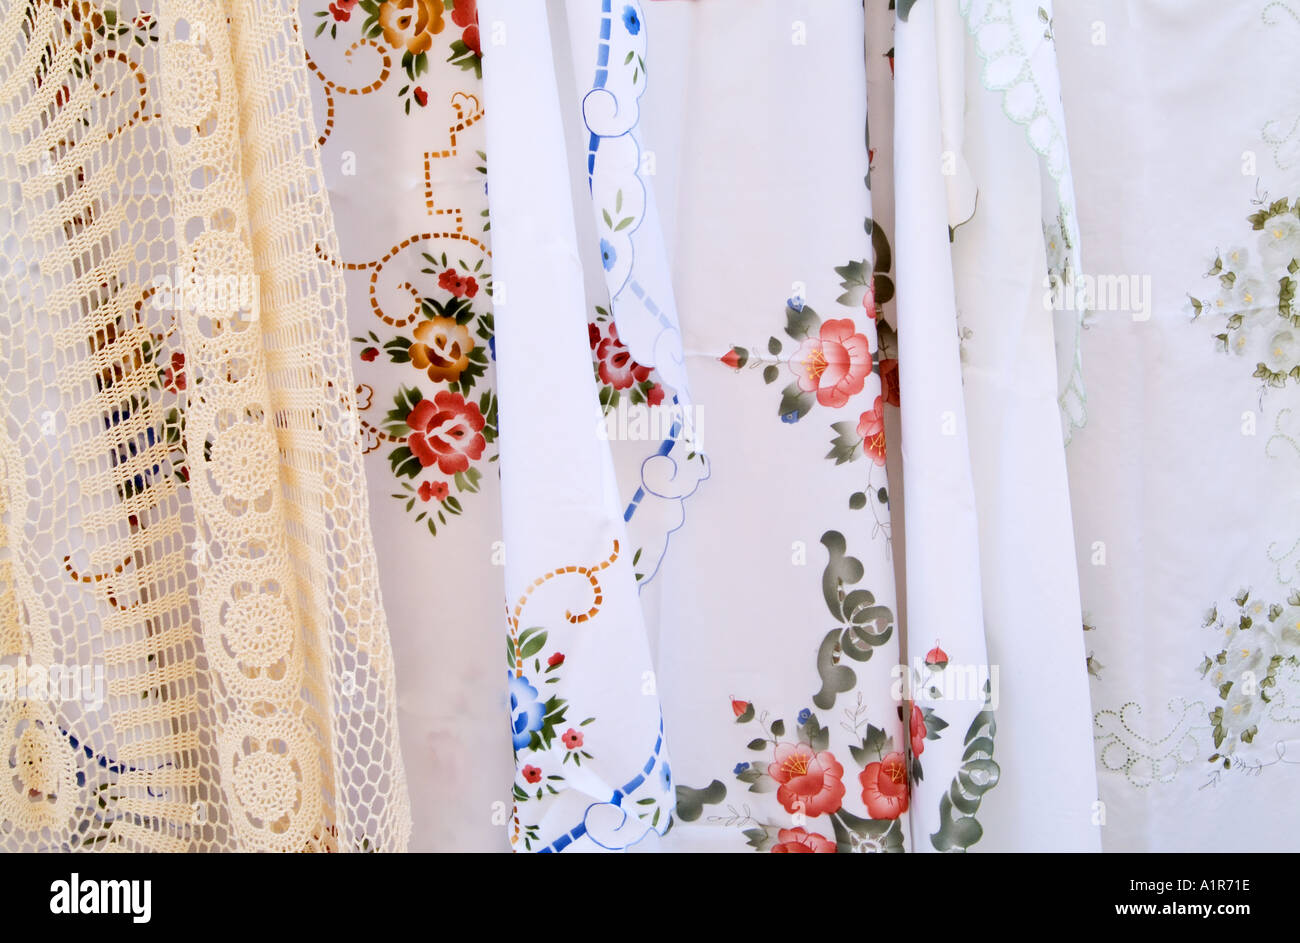 cypriot lace and tableclothes Stock Photo